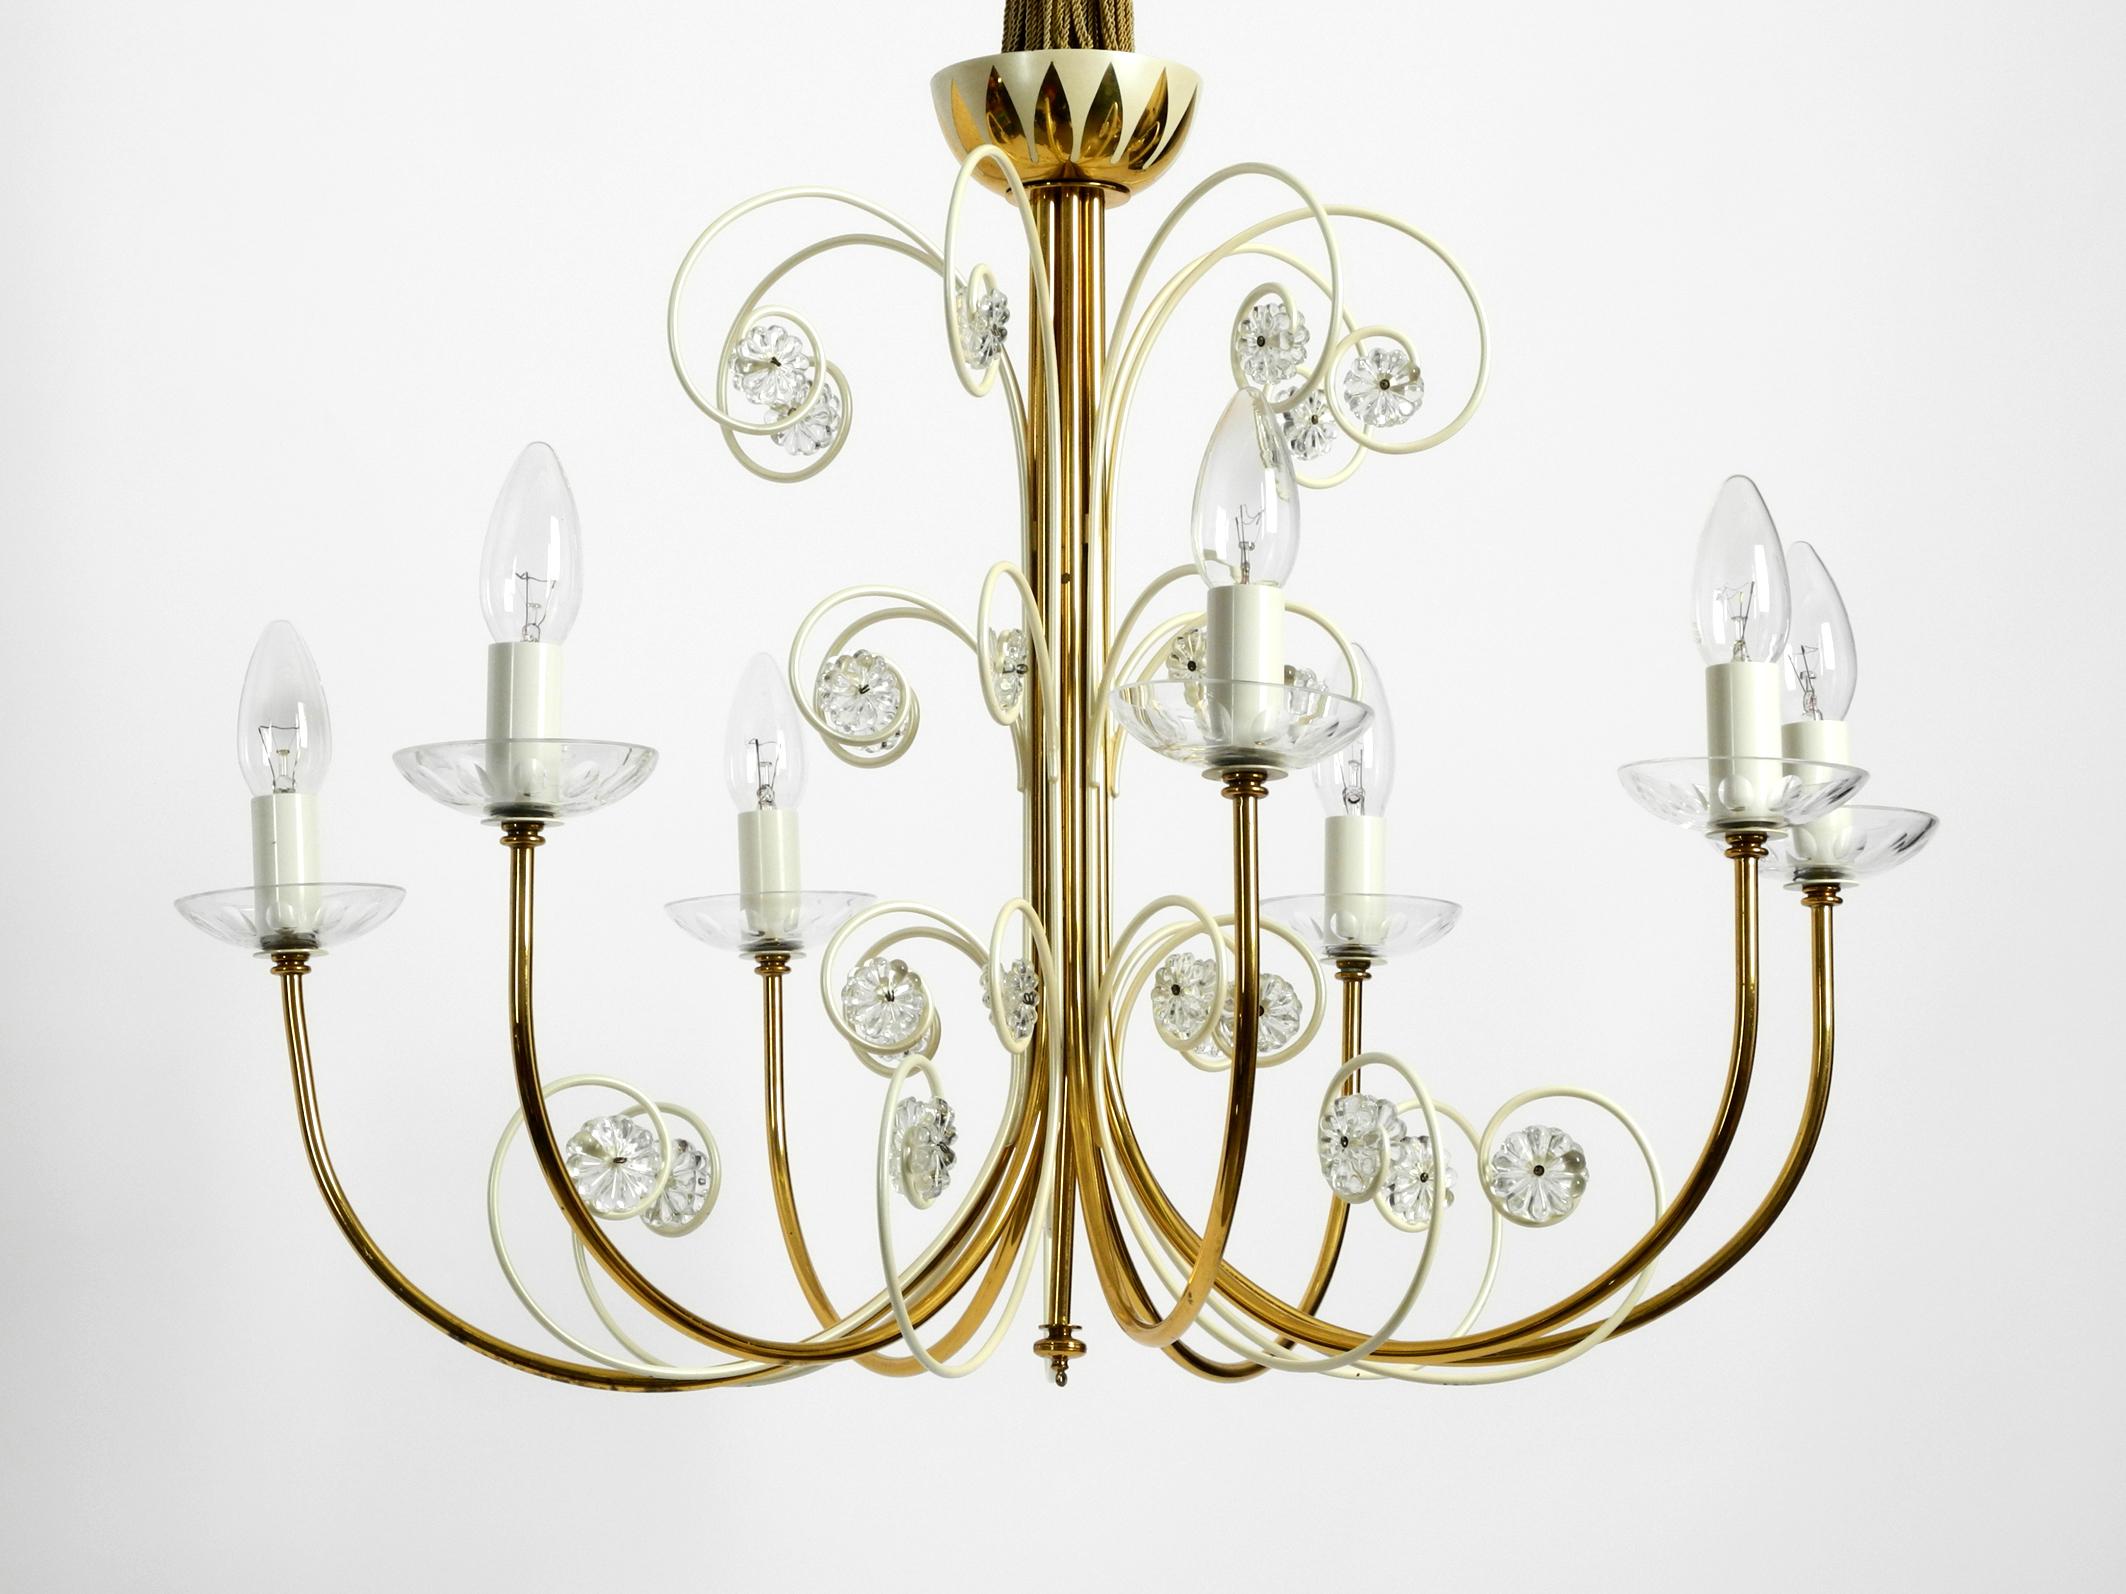 Very rare beautiful midcentury brass chandelier with 7 arms from the Vereinigten Werkstätten. Made in Germany. The lamp is in very good condition with almost no visible signs of wear.
Comes from first hand, has been used very little. Very